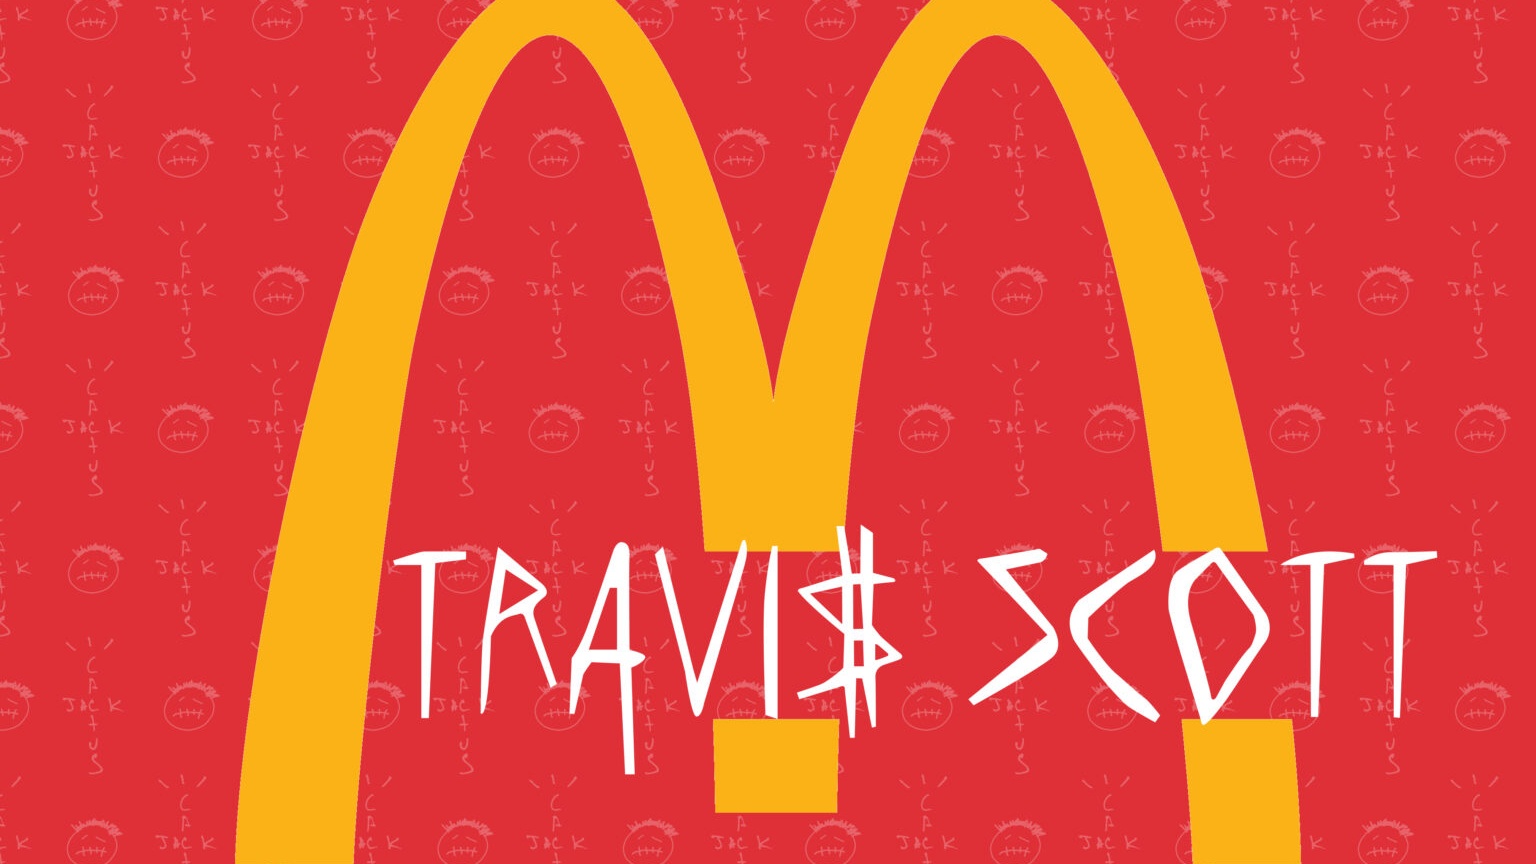 Travis Scott and MCDONALD’S unveil Collab campaign featuring Special meal and reimagined logo